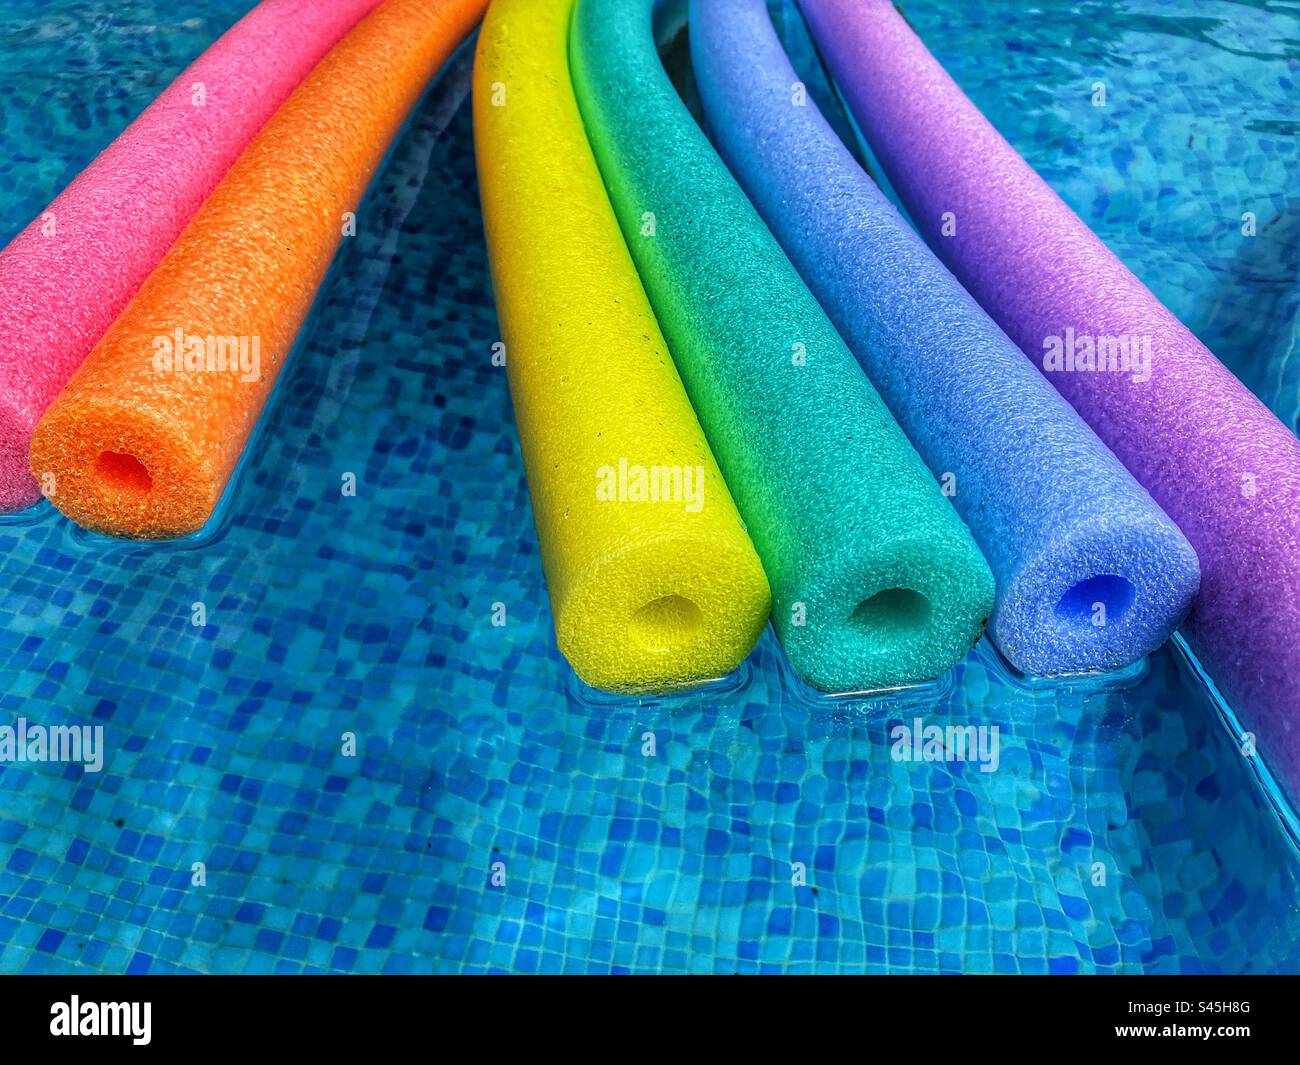 Summer vibes, rainbow coloured polyethylene pool noodles floating on water of blue tiled swimming pool, with copy space Stock Photo